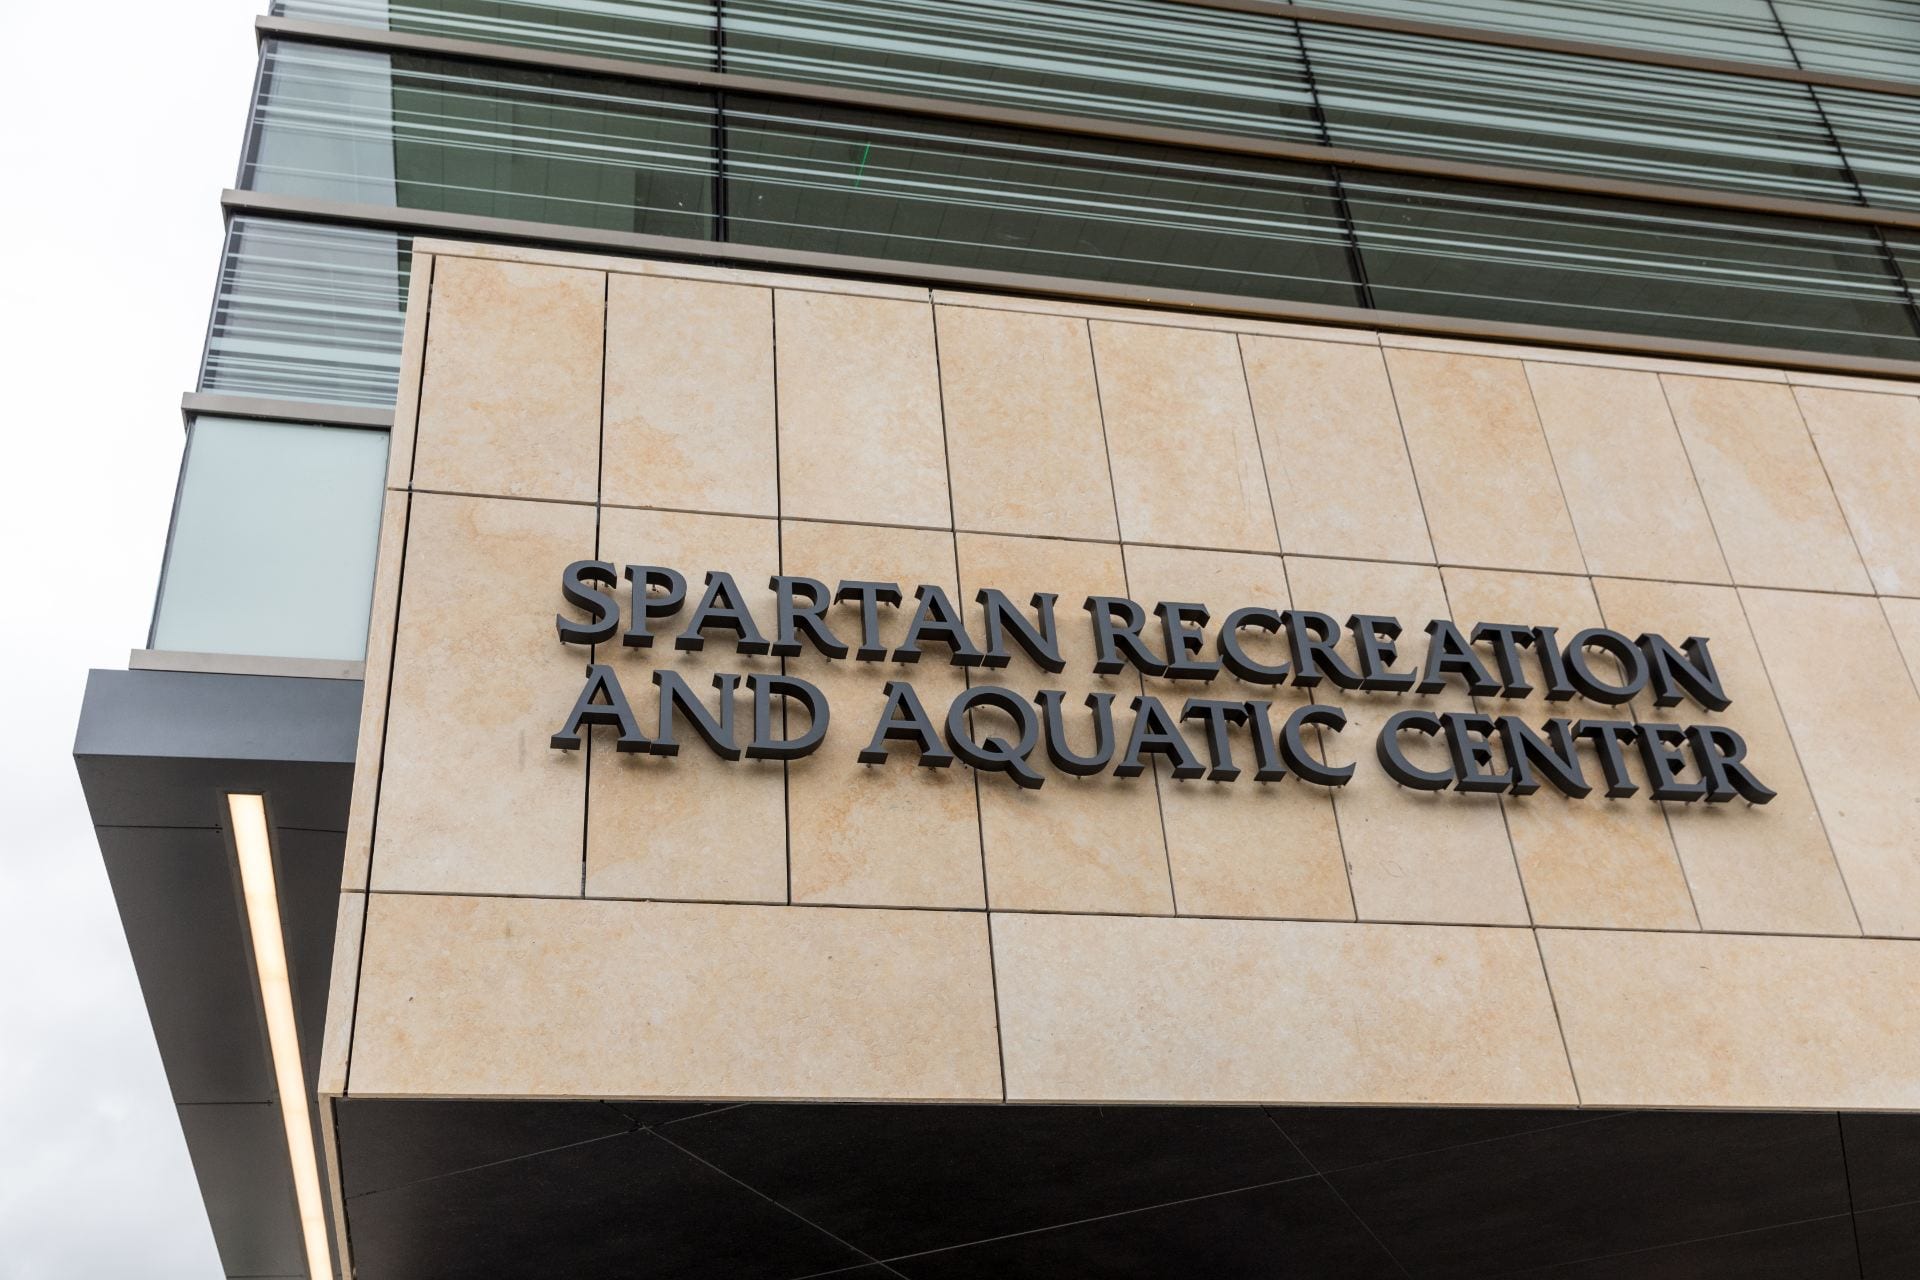 Students and community members are invited to a ribbon cutting for the Spartan Recreation and Aquatic Center on April 18. Photo by David Schmitz